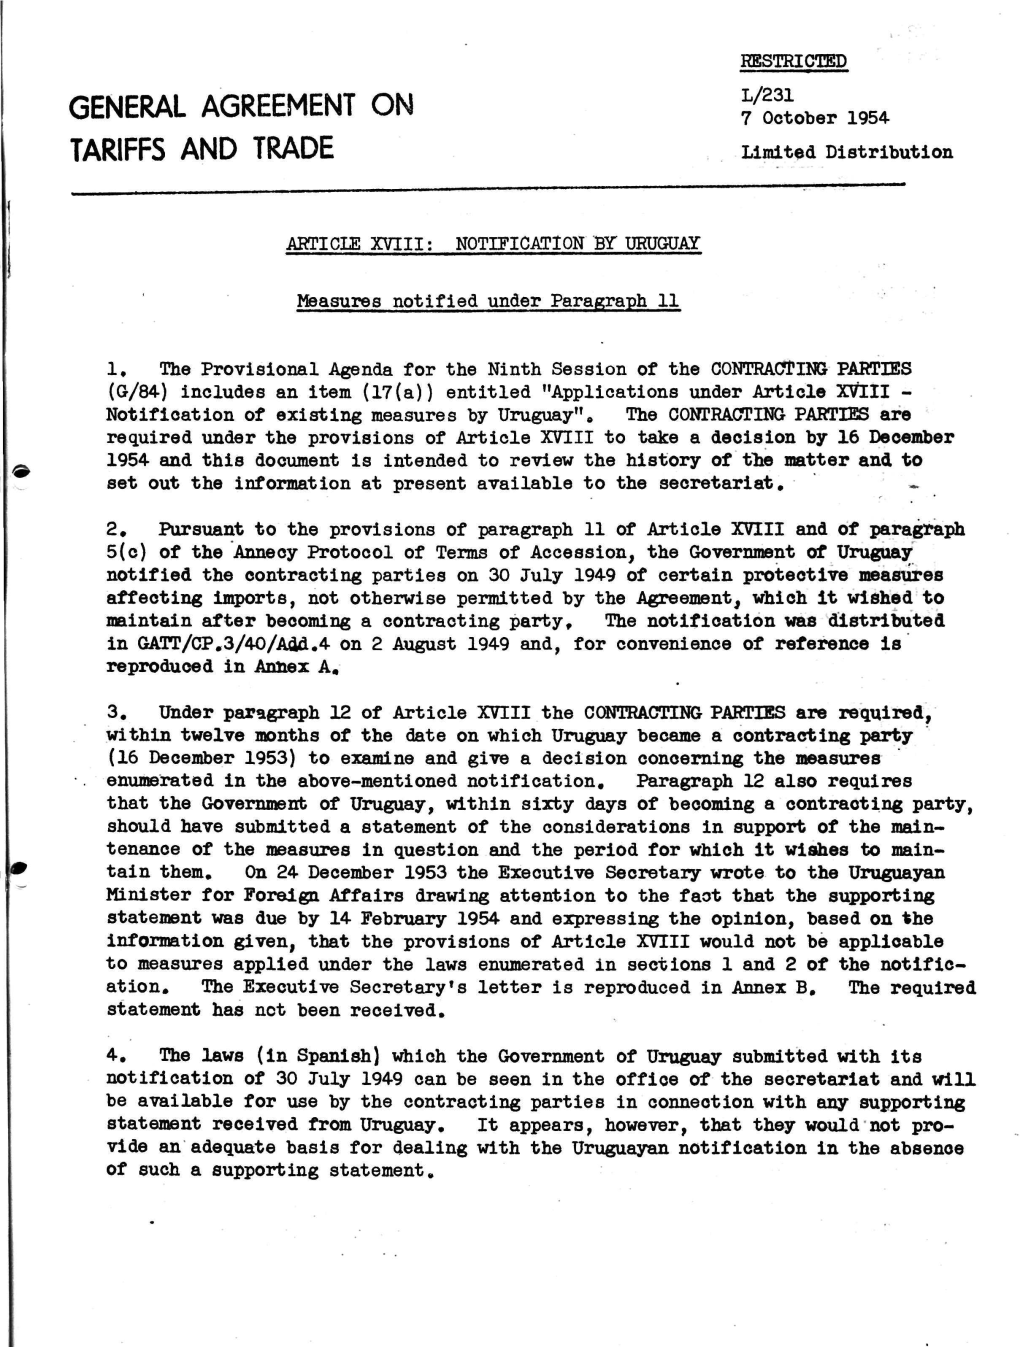 GENERAL AGREEMENT on $*S*» 1954 TARIFFS and TRADE Limited Distribution